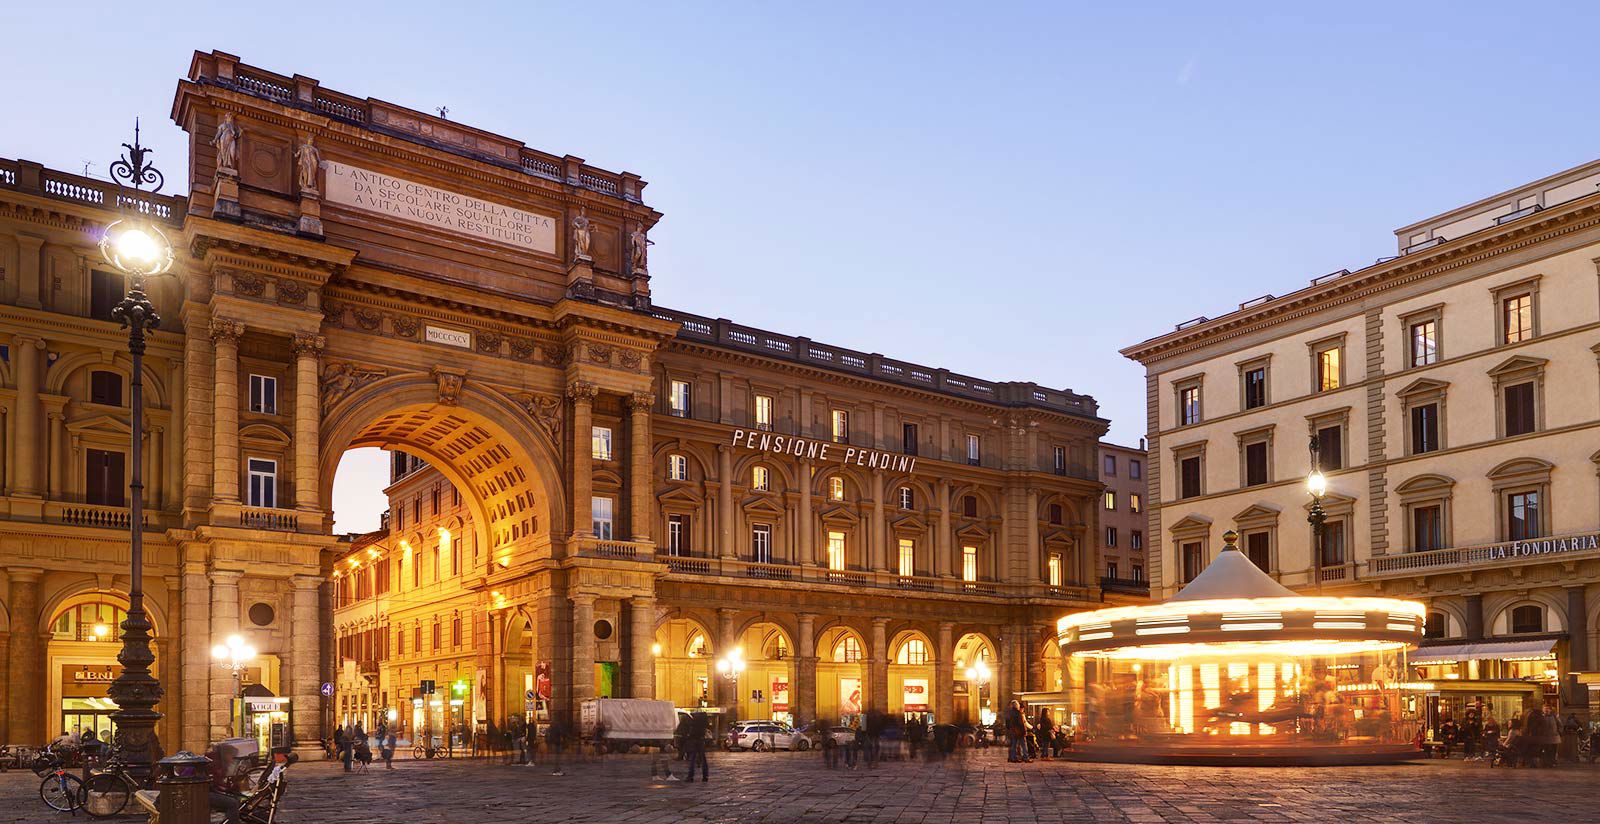 VISIT THE NEAR UFFIZI DURING YOUR STAY AT HOTEL PENDINI 4